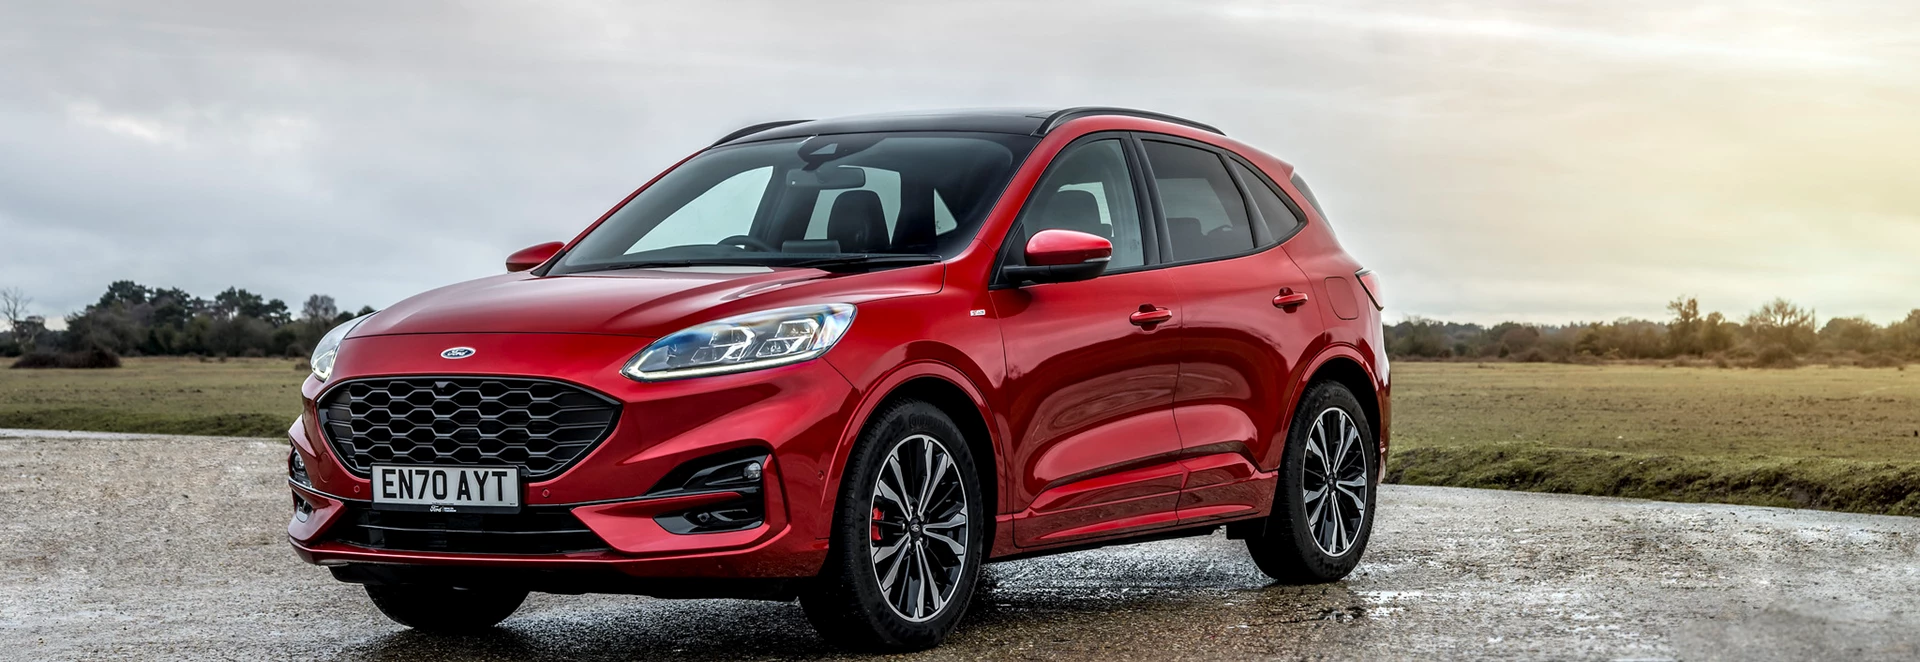 Ford Kuga: 5 things you need to know 